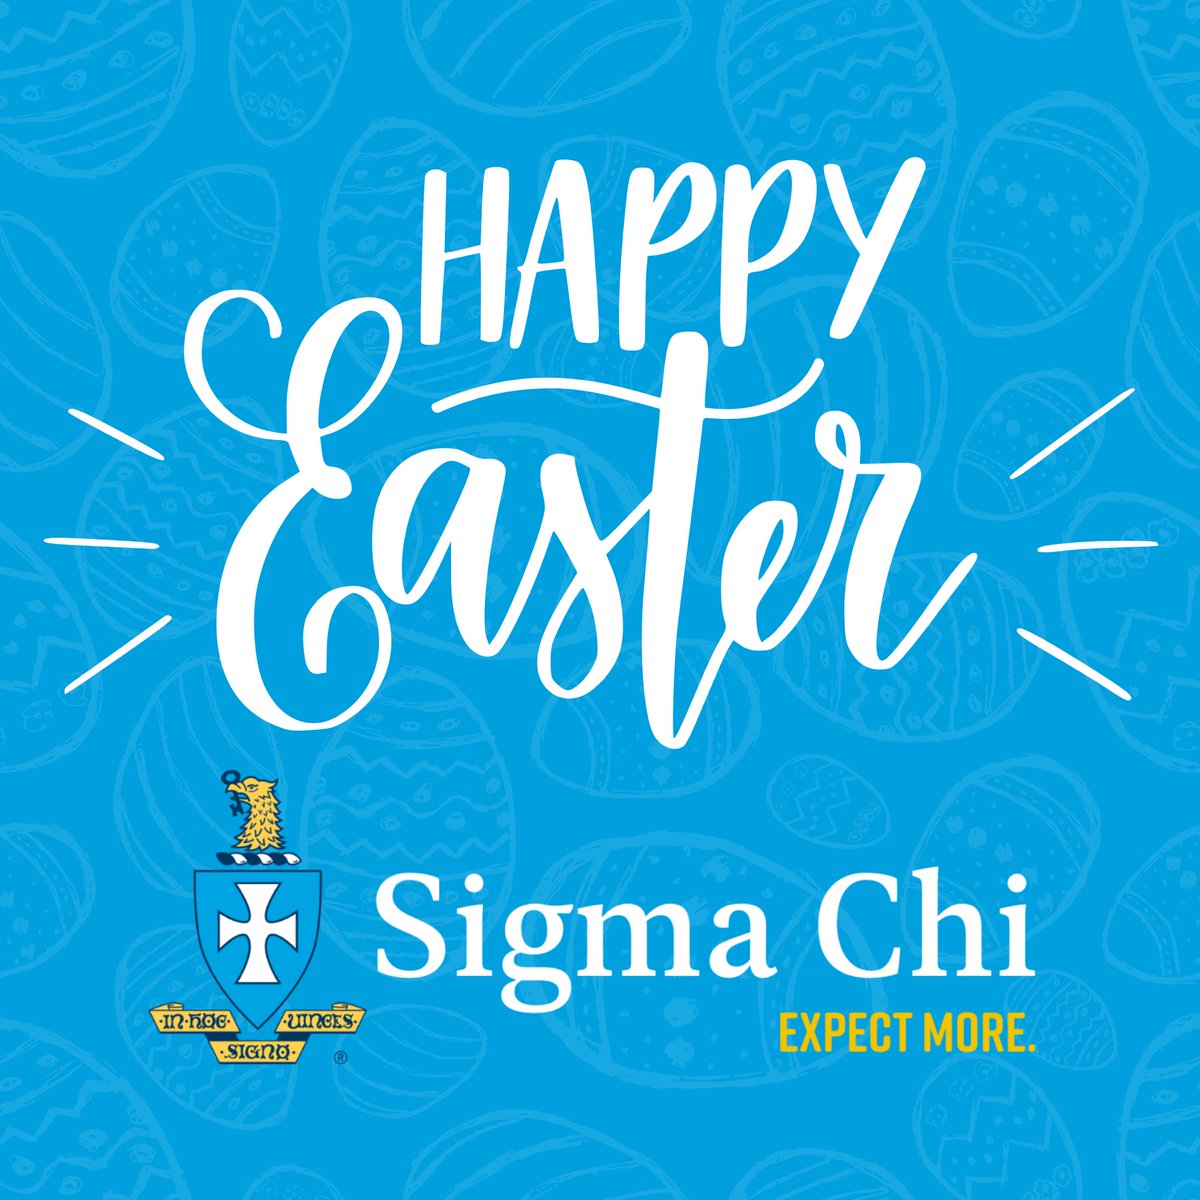 Happy Easter to our brothers, sweethearts, family members and friends!